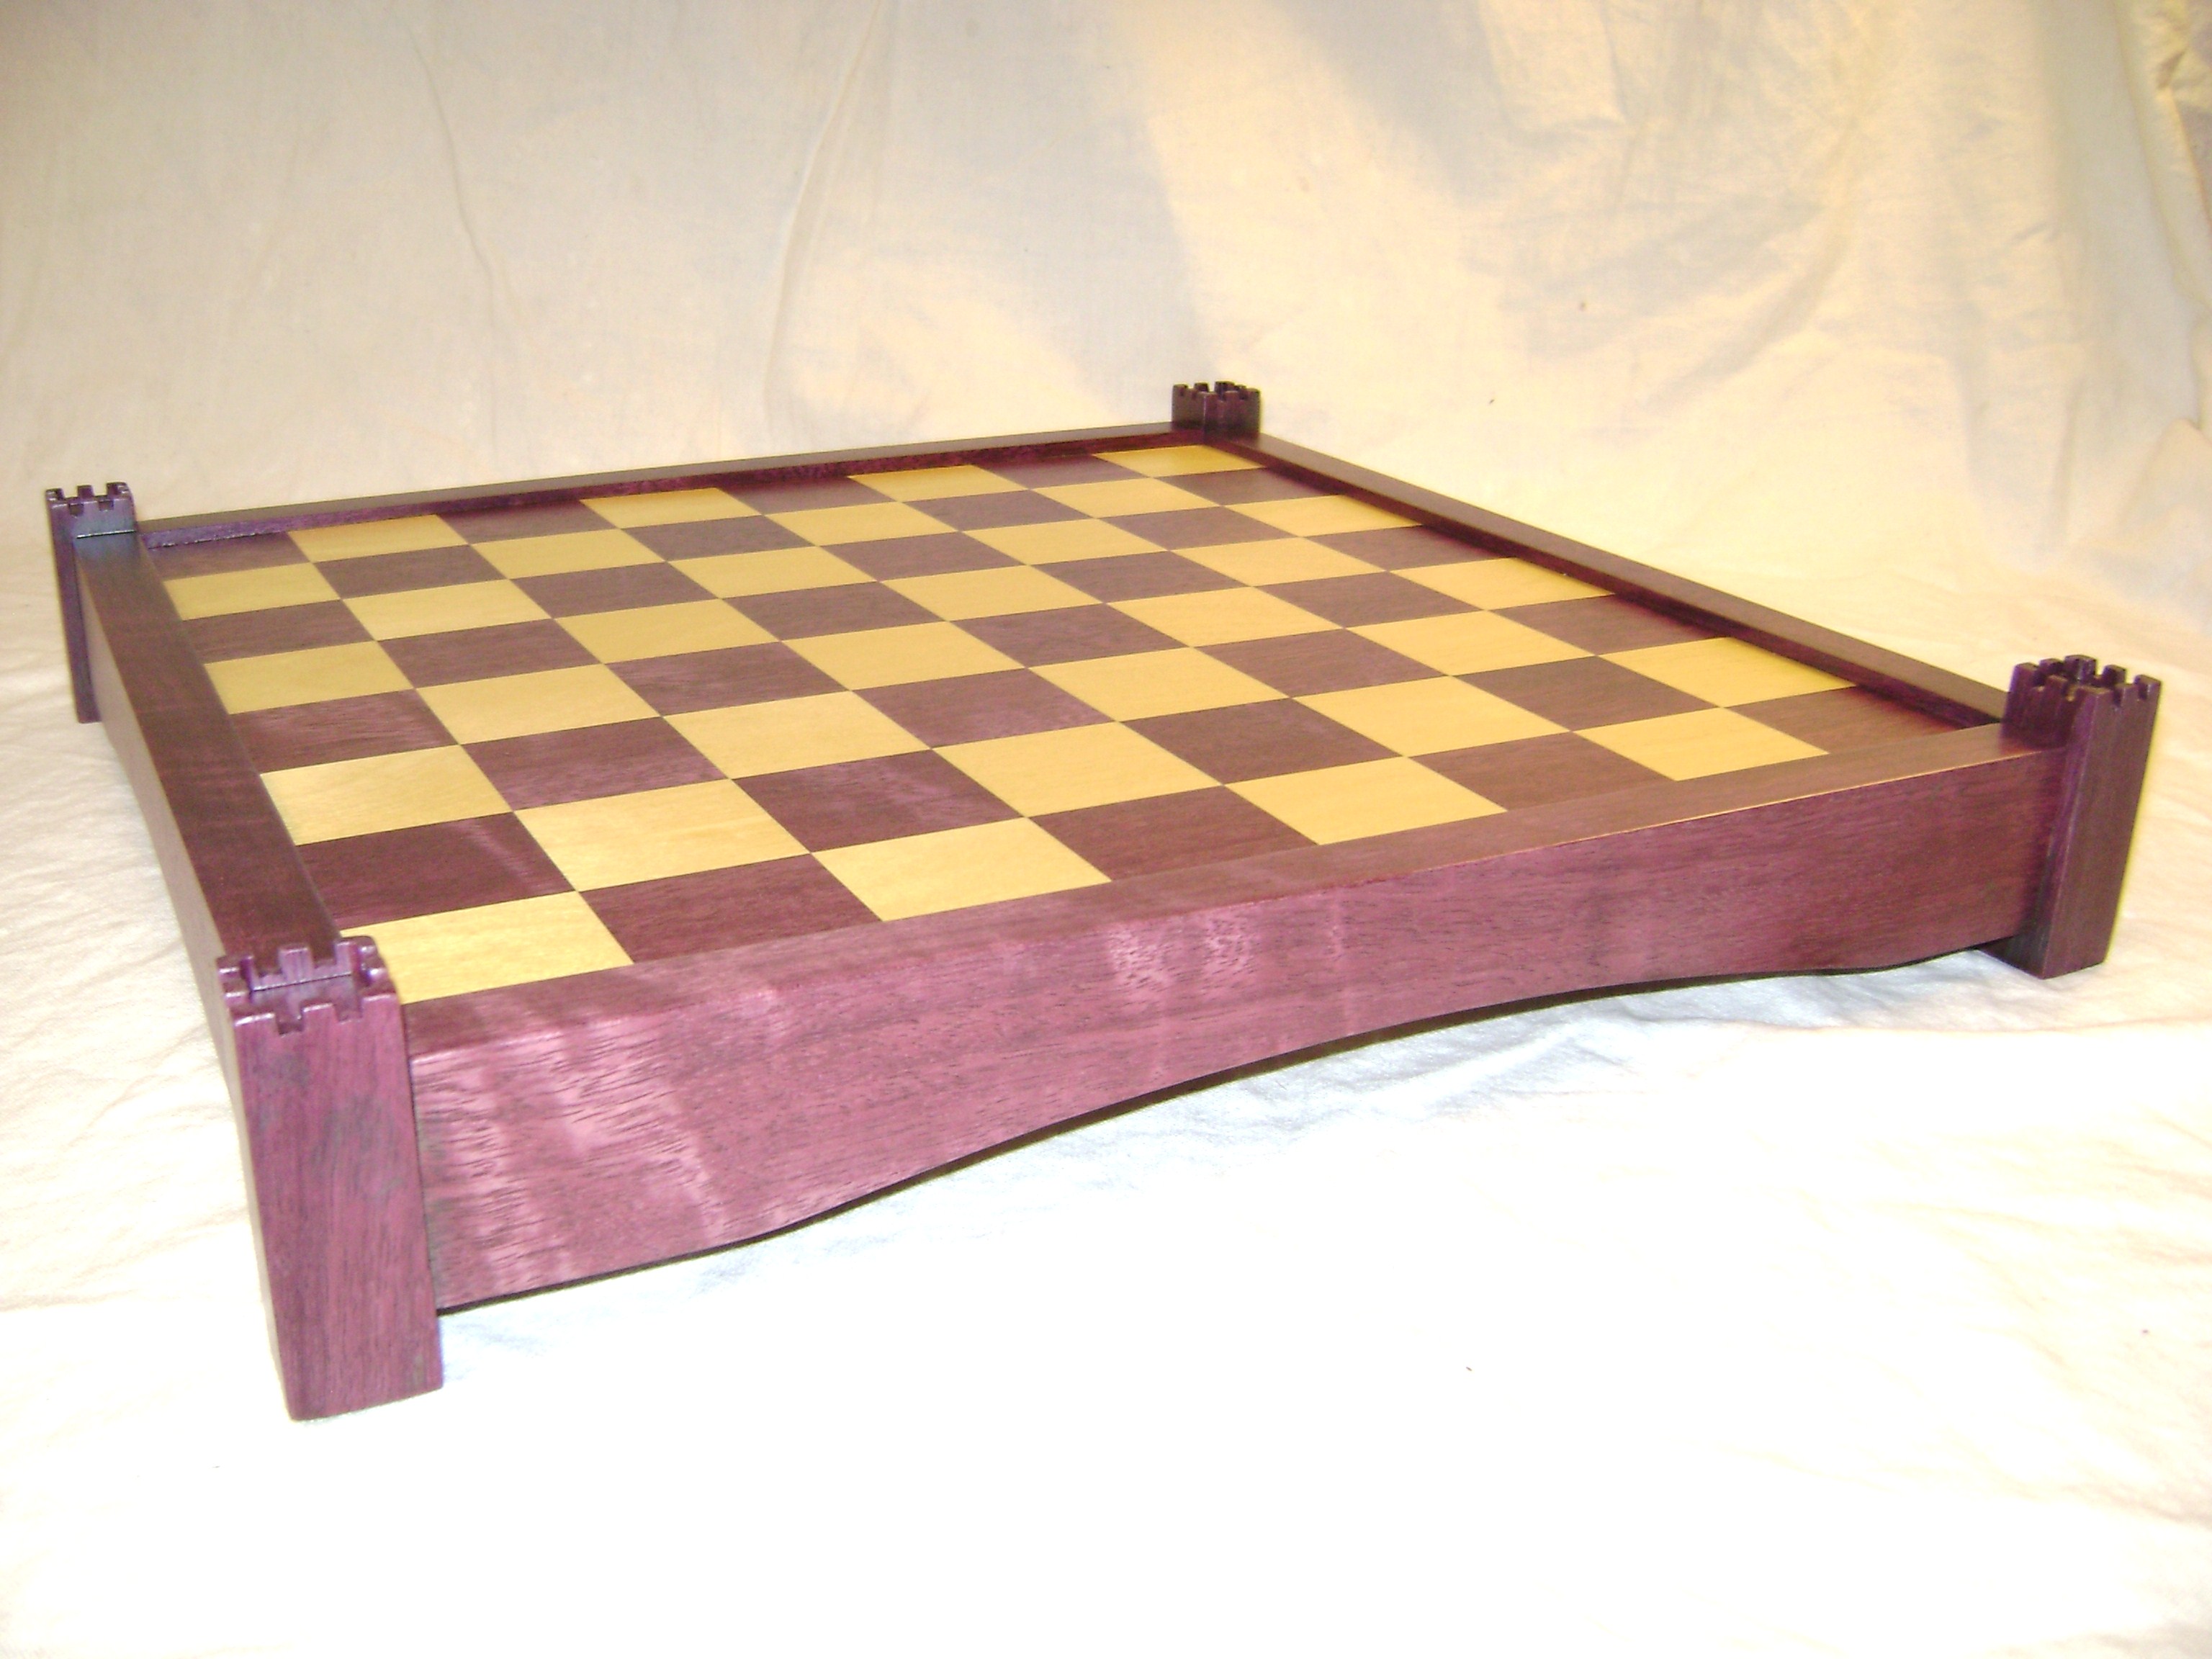 Handmade Chess Board, Wooden, 3 in one